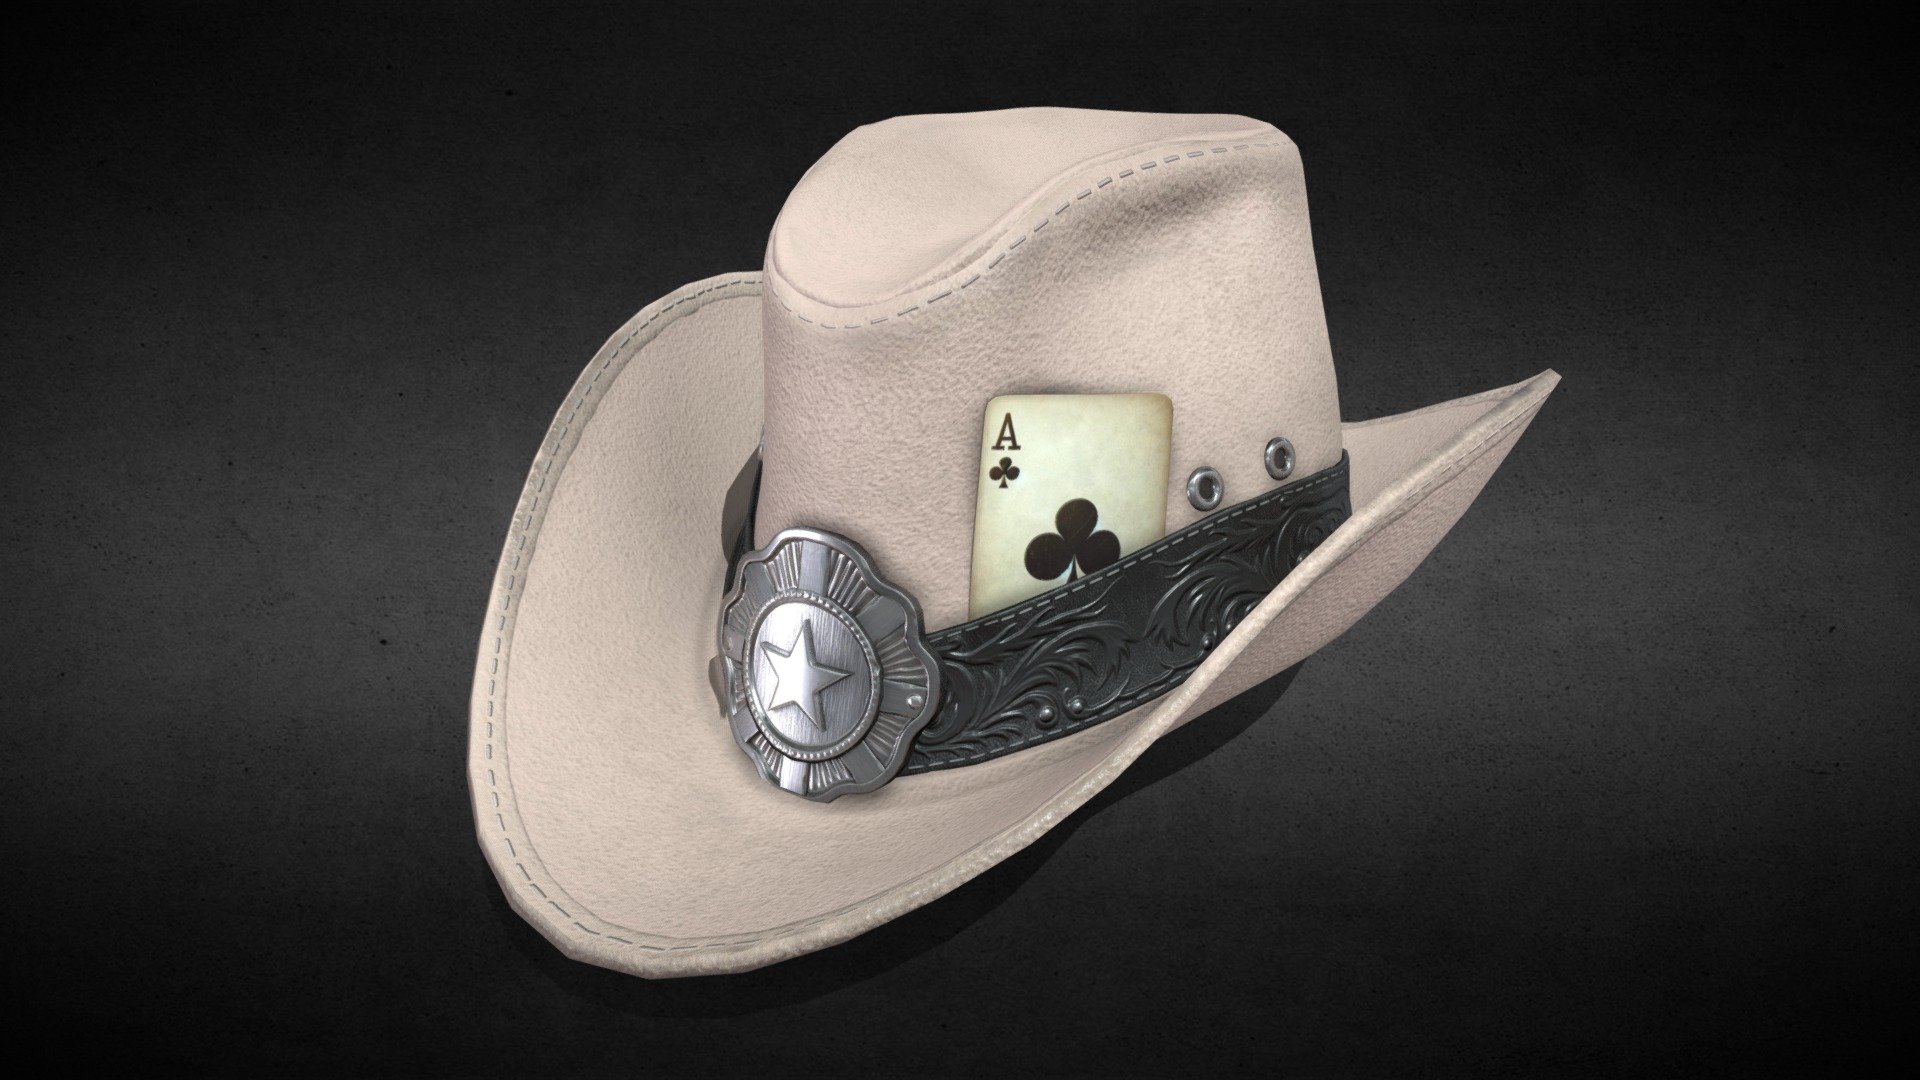 Our 3D cowboy hat model is a testament to authenticity, featuring a soft beige suede finish that invokes the rugged yet inviting feel of the Wild West. The material is finely stitched, offering a realistic texture that's nearly tangible. A boldly crafted silver sheriff's badge provides a striking contrast with its metallic sheen, complementing the dark, ornately tooled leather band that encircles the base of the hat. Tucked into the band, an aged ace of clubs card adds a touch of mystery and gamble, rounding off a model that exudes both detail and character 3d model